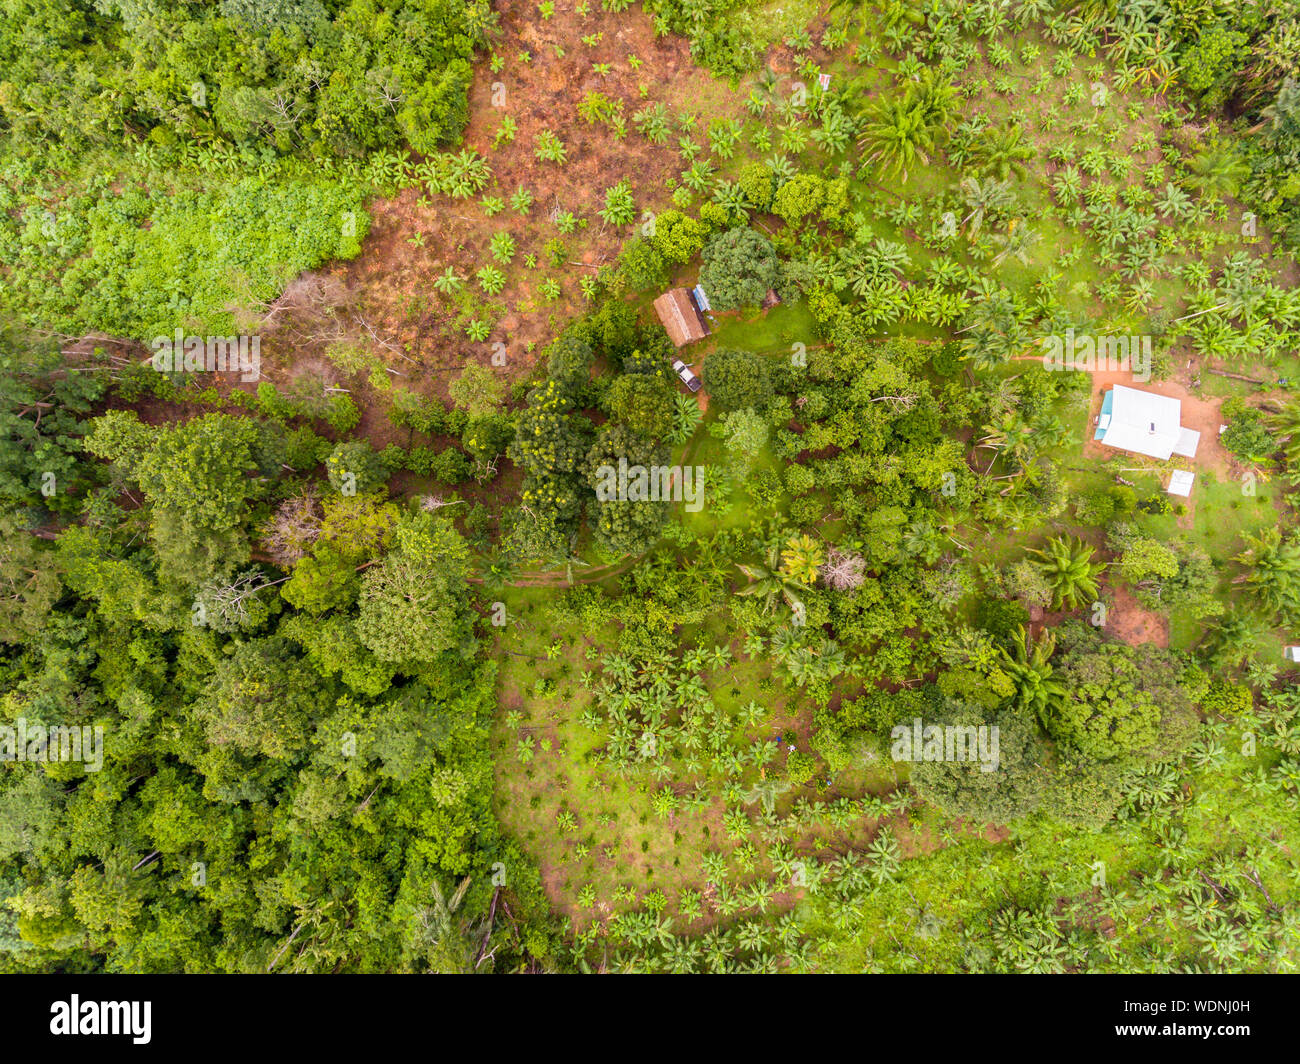 Amazon Agroforestry Parcel/Land with a Variety of Tropical Crops a Bananas, Brazil Nuts, Copoazu, Papaya, Pineapple, Yuca and More Stock Photo